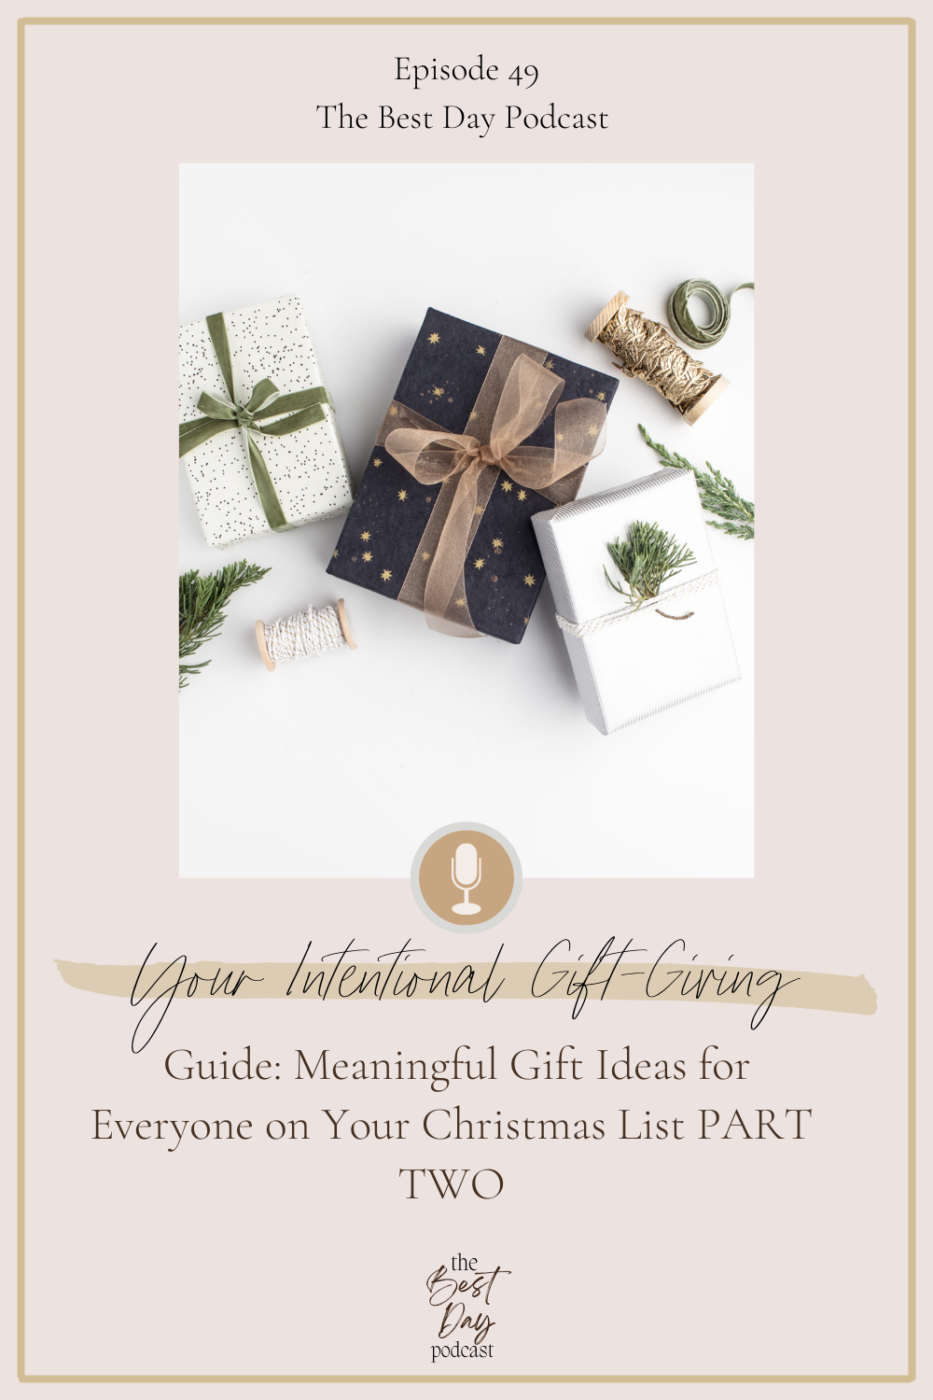 intentional gift ideas